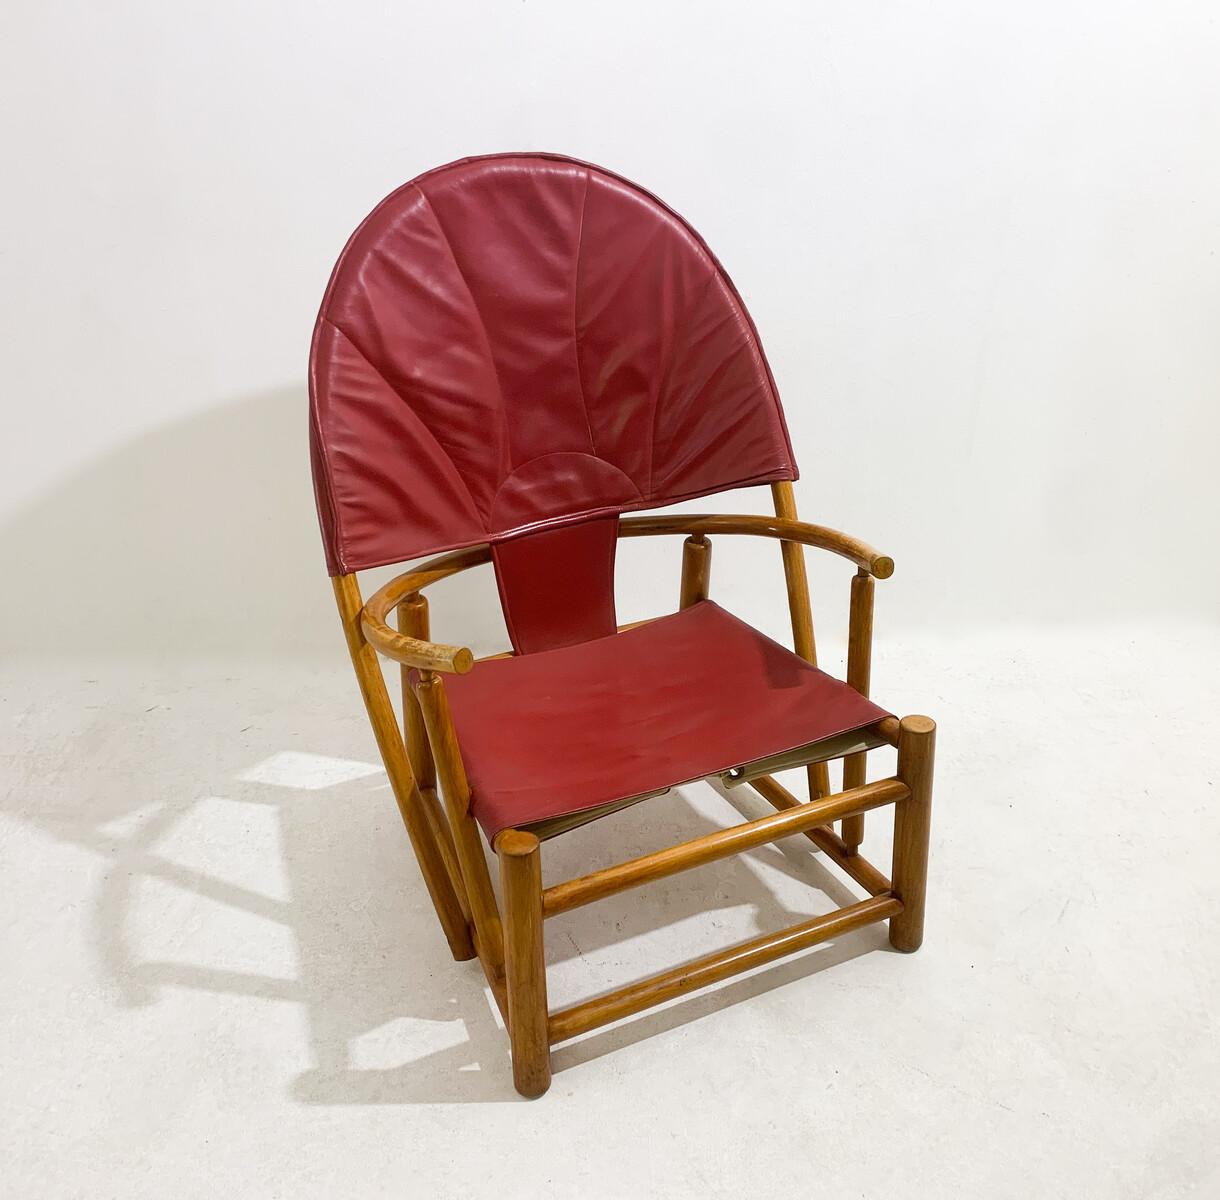 Italian Red G23 Hoop Armchair by Piero Palange & Werther Toffoloni, 1970s For Sale